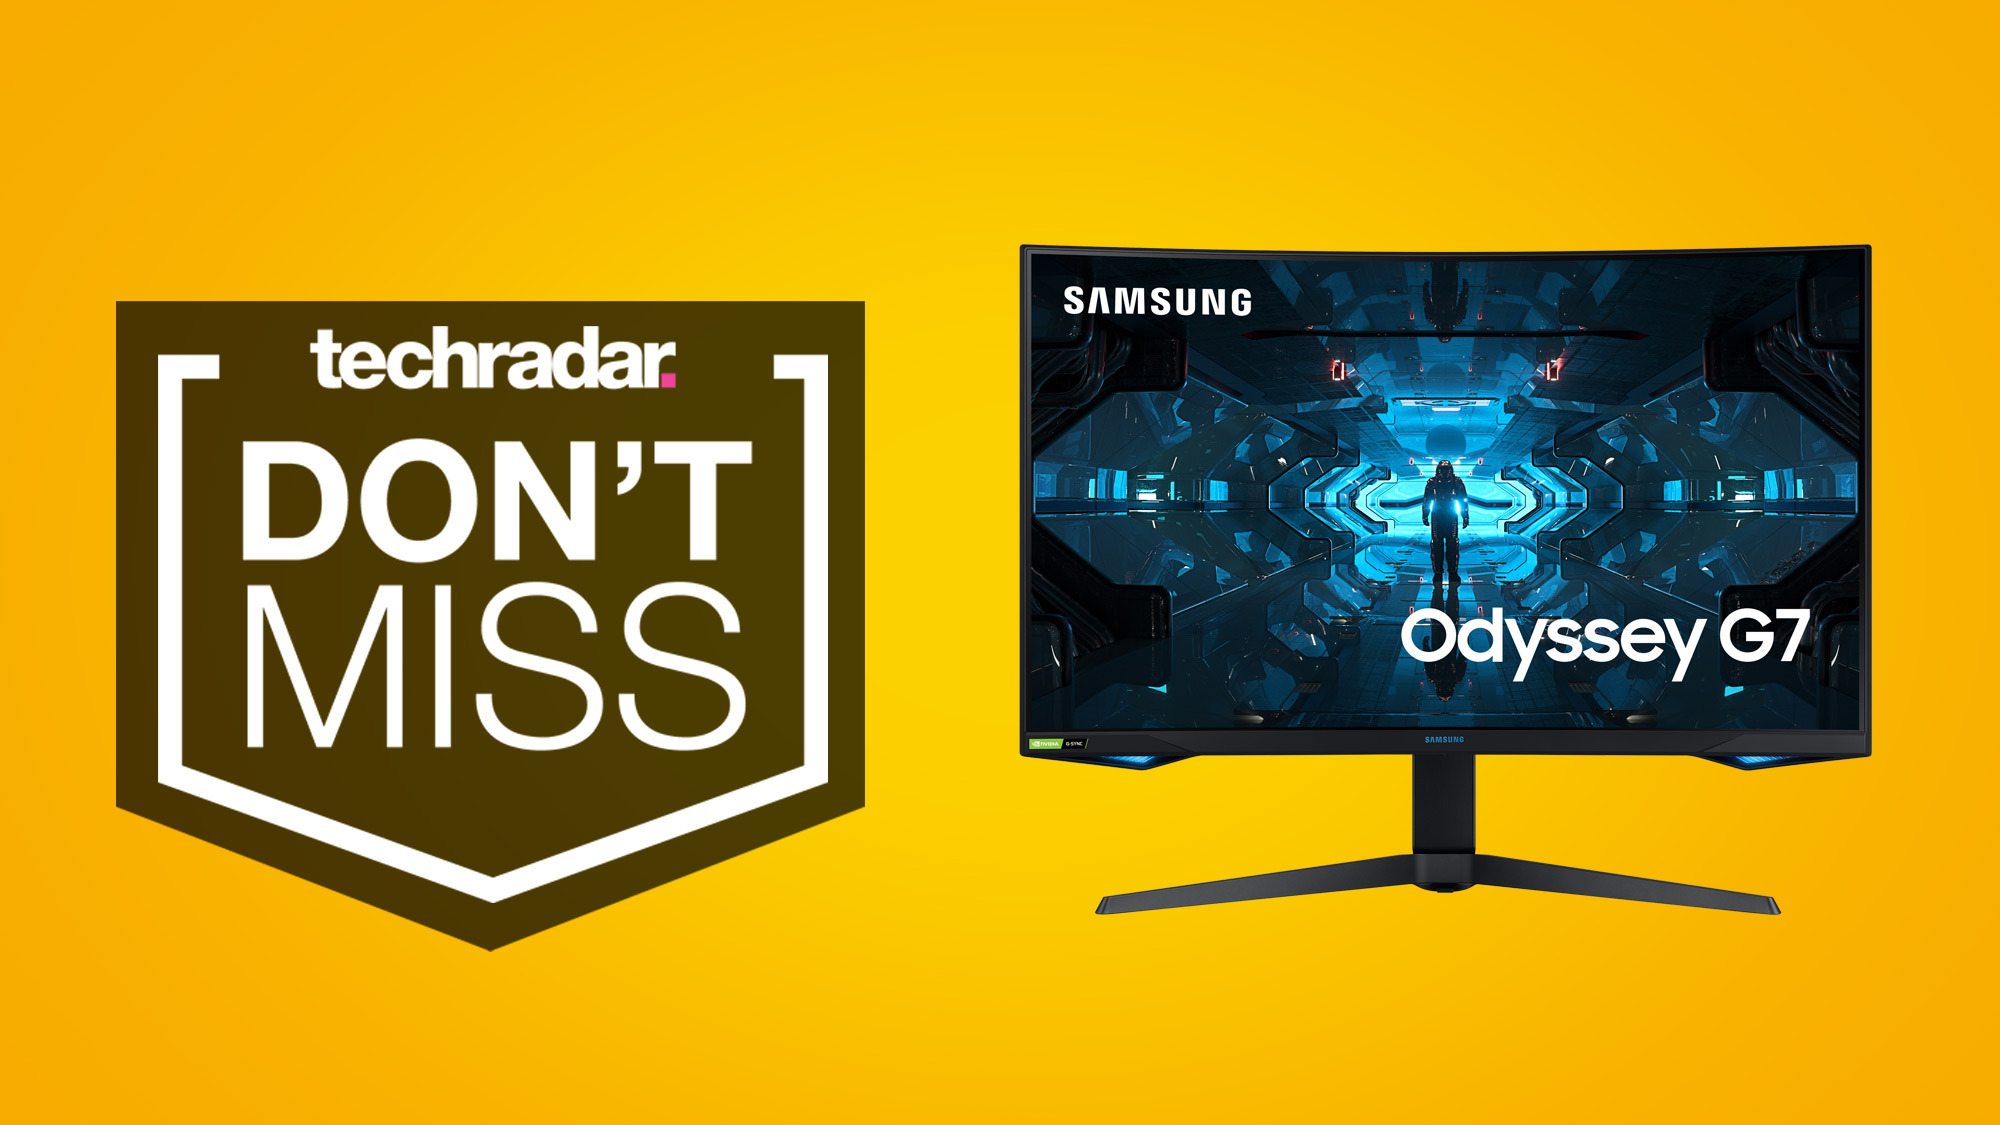 Samsung Odyssey G3, G5, and G7 Gaming Monitors Review 